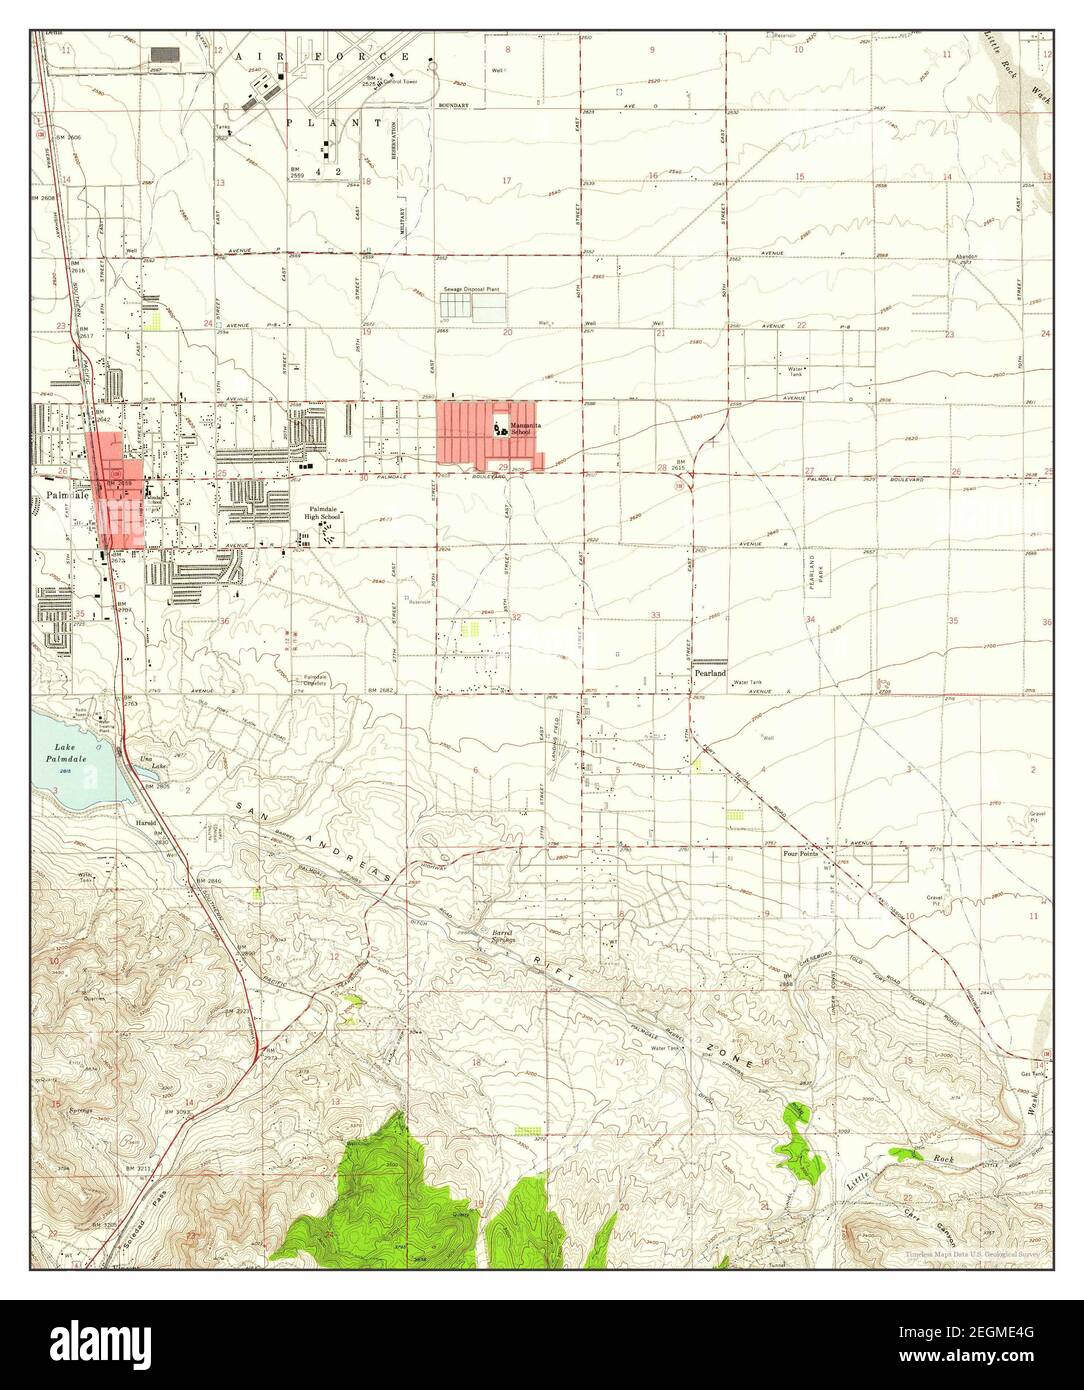 Palmdale, California, map 1958, 1:24000, United States of America by Timeless Maps, data U.S. Geological Survey Stock Photo